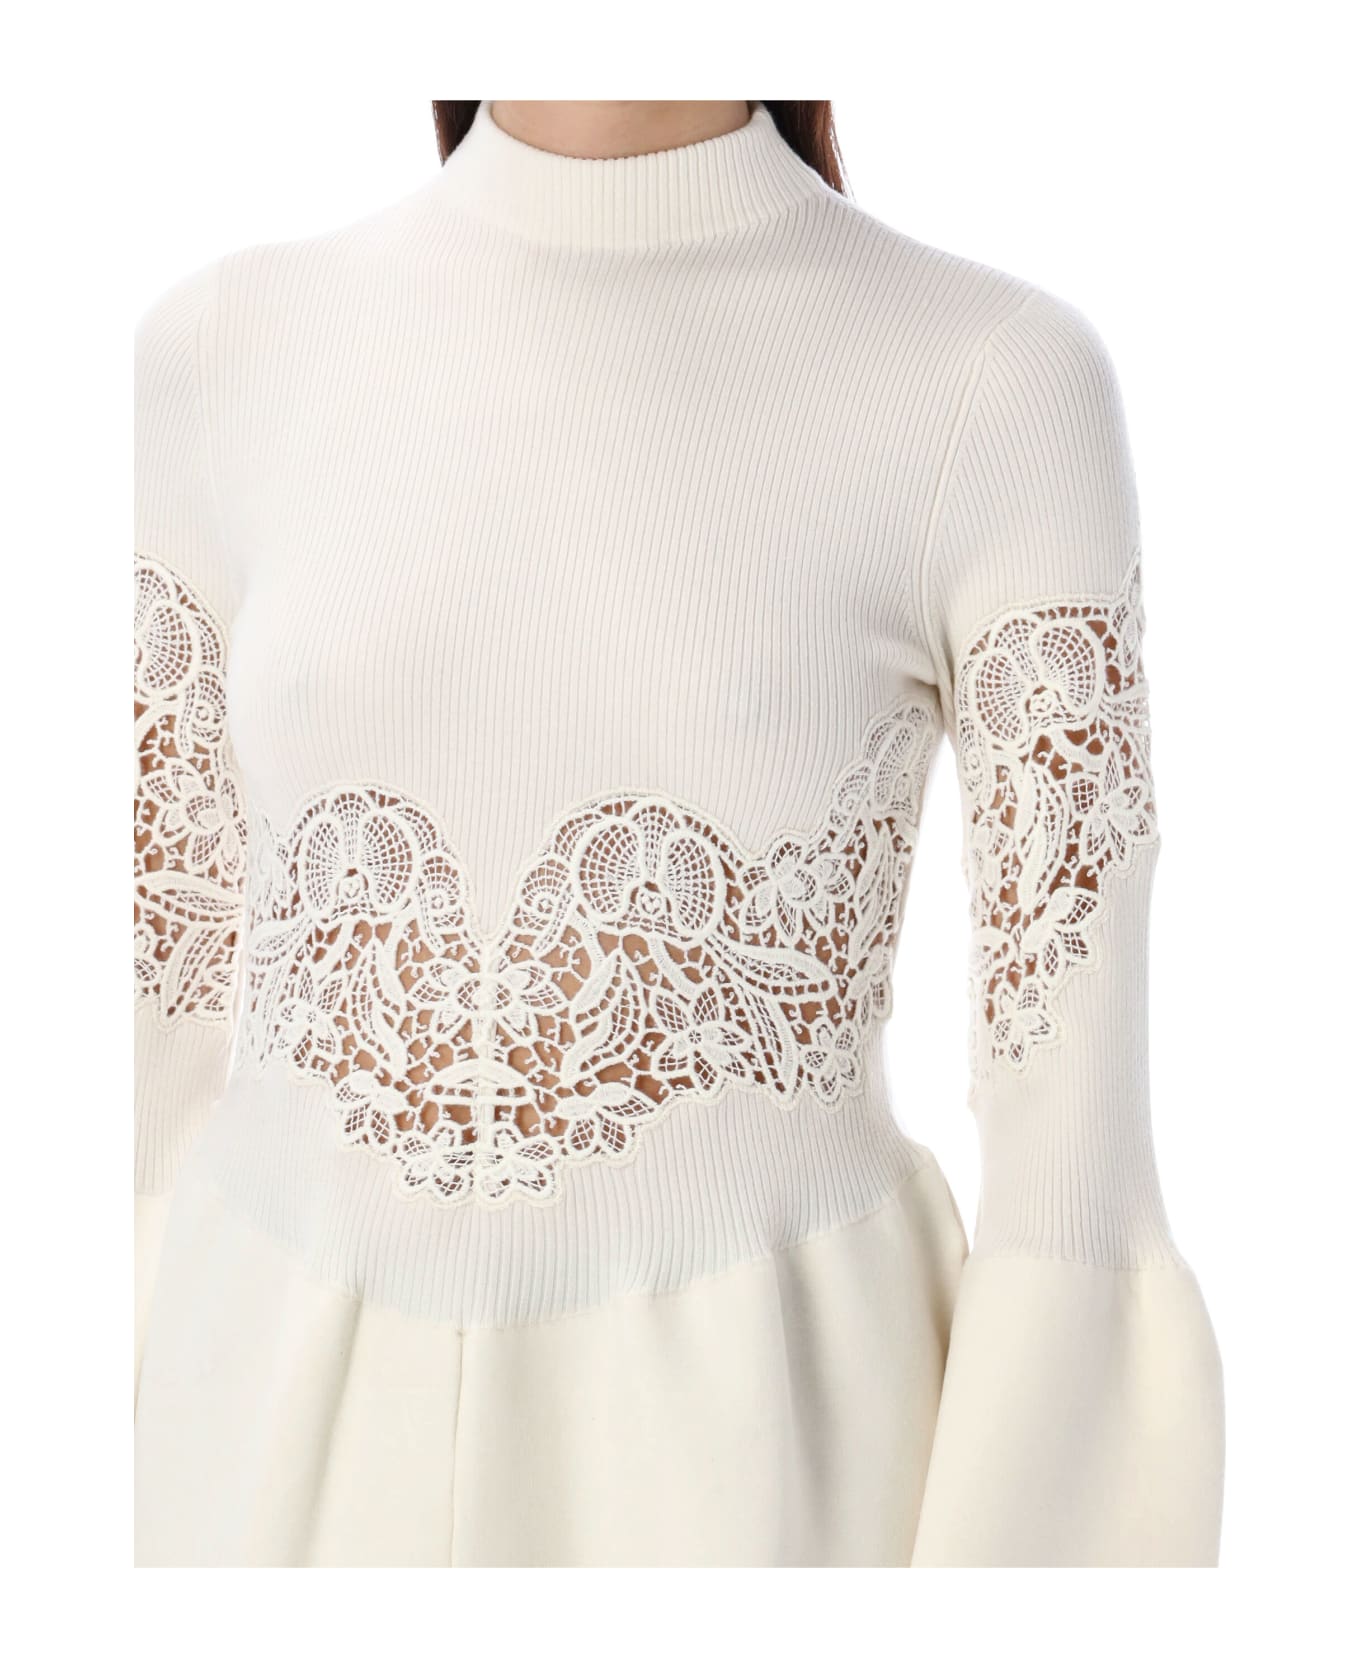 Chloé Lwer-impact Wool Lace Inserts Jumper - ICONIC MILK ニットウェア